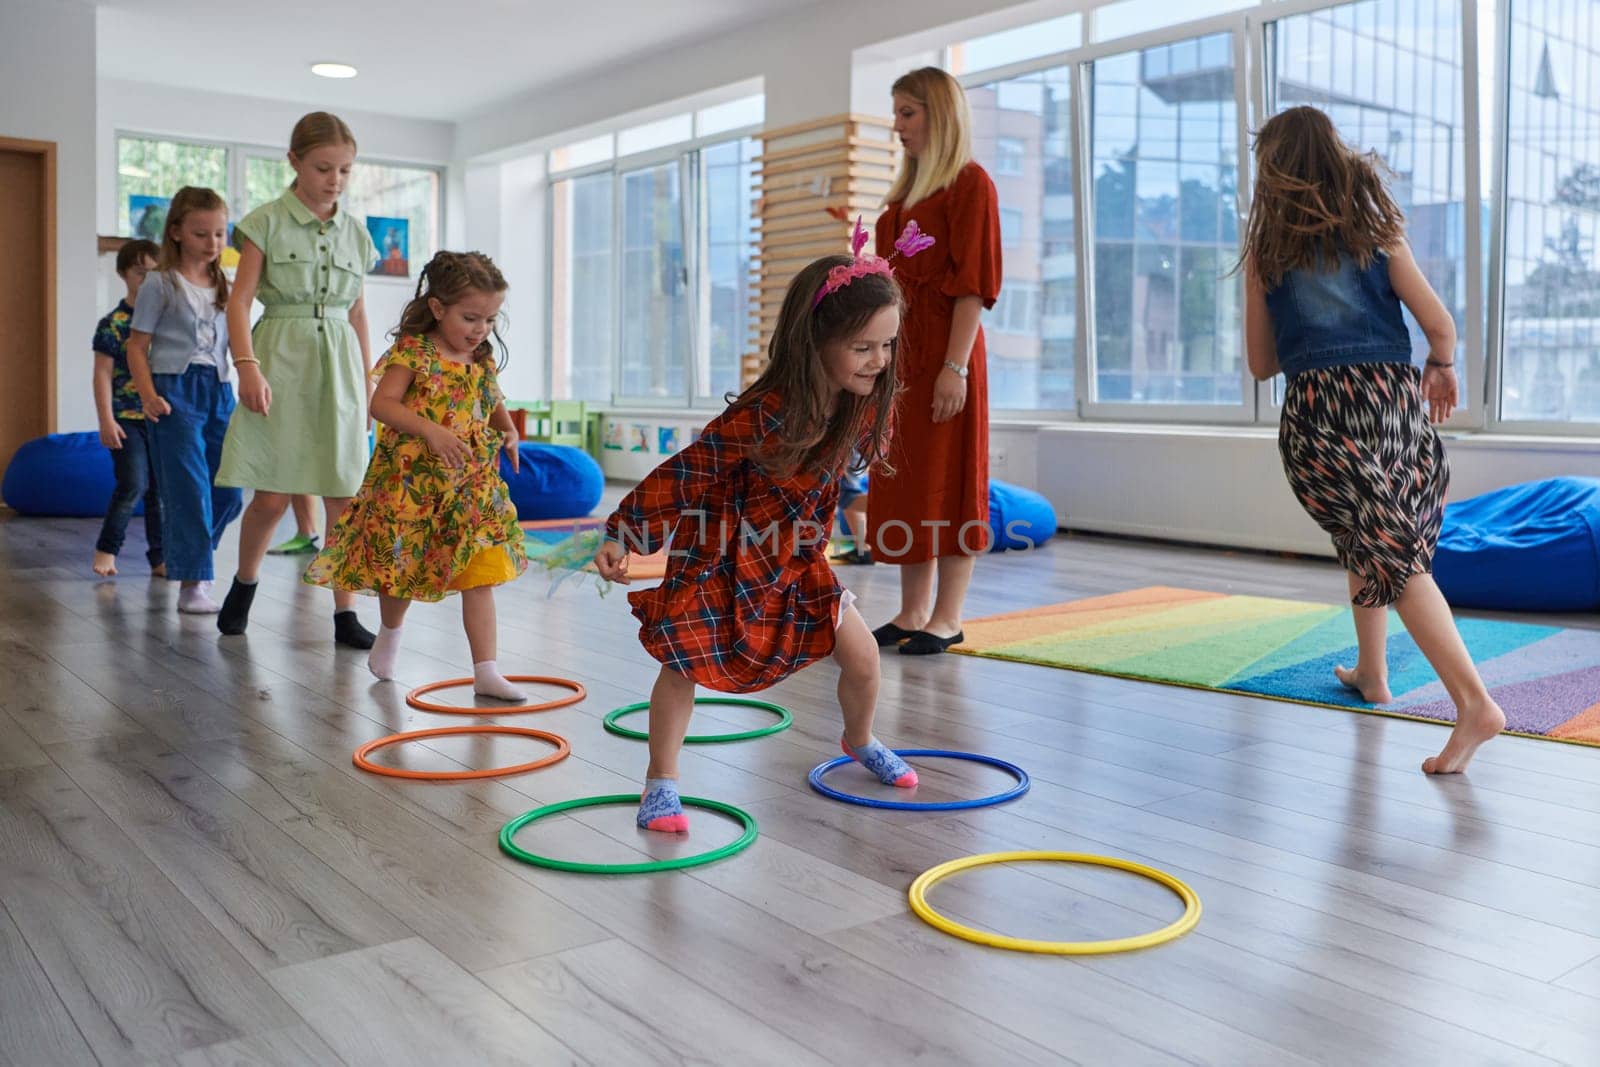 Small nursery school children with female teacher on floor indoors in classroom, doing exercise. Jumping over hula hoop circles track on the floor